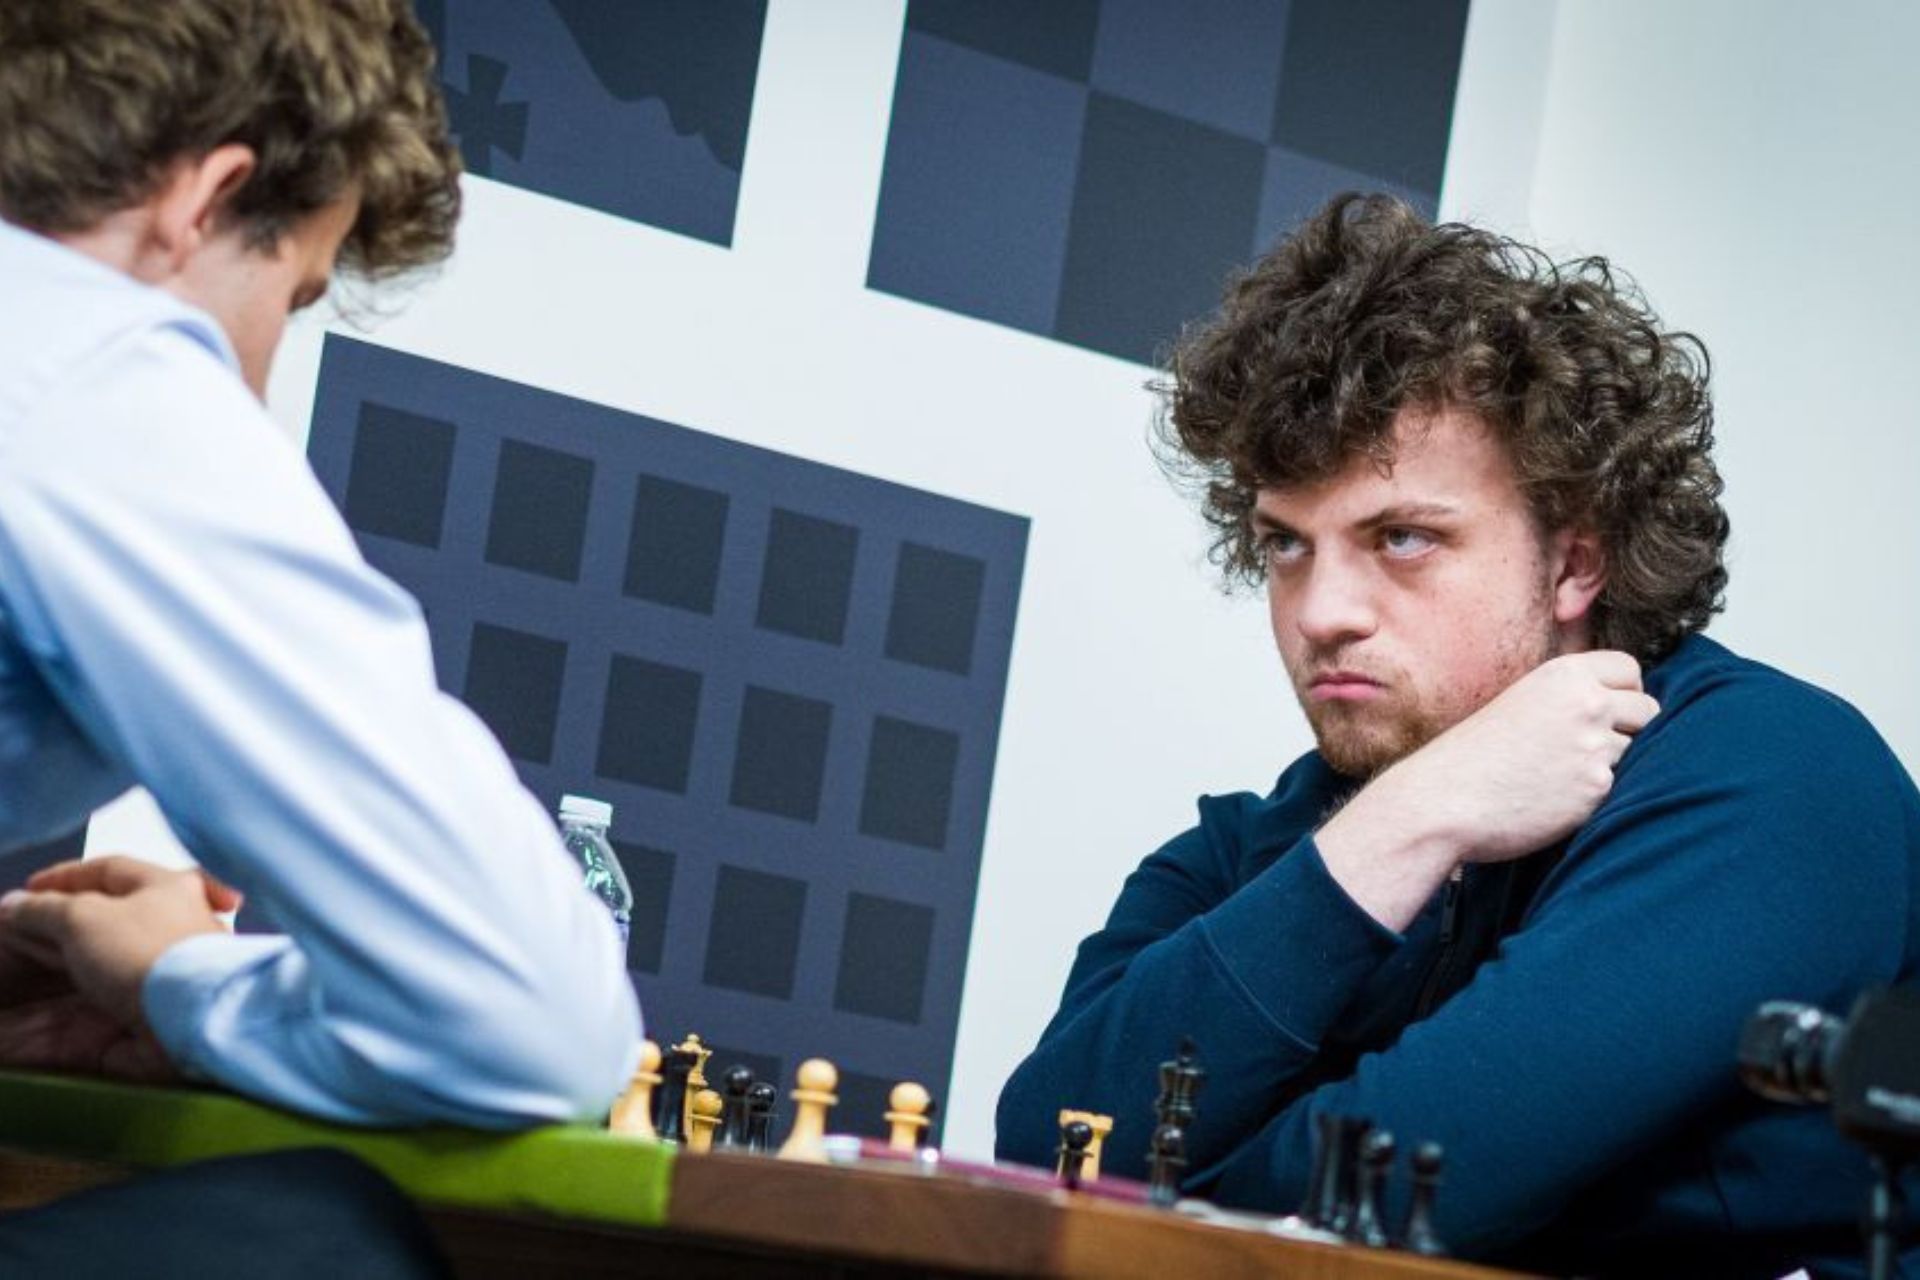 Chess: Magnus Carlsen wins online and will face the new generation